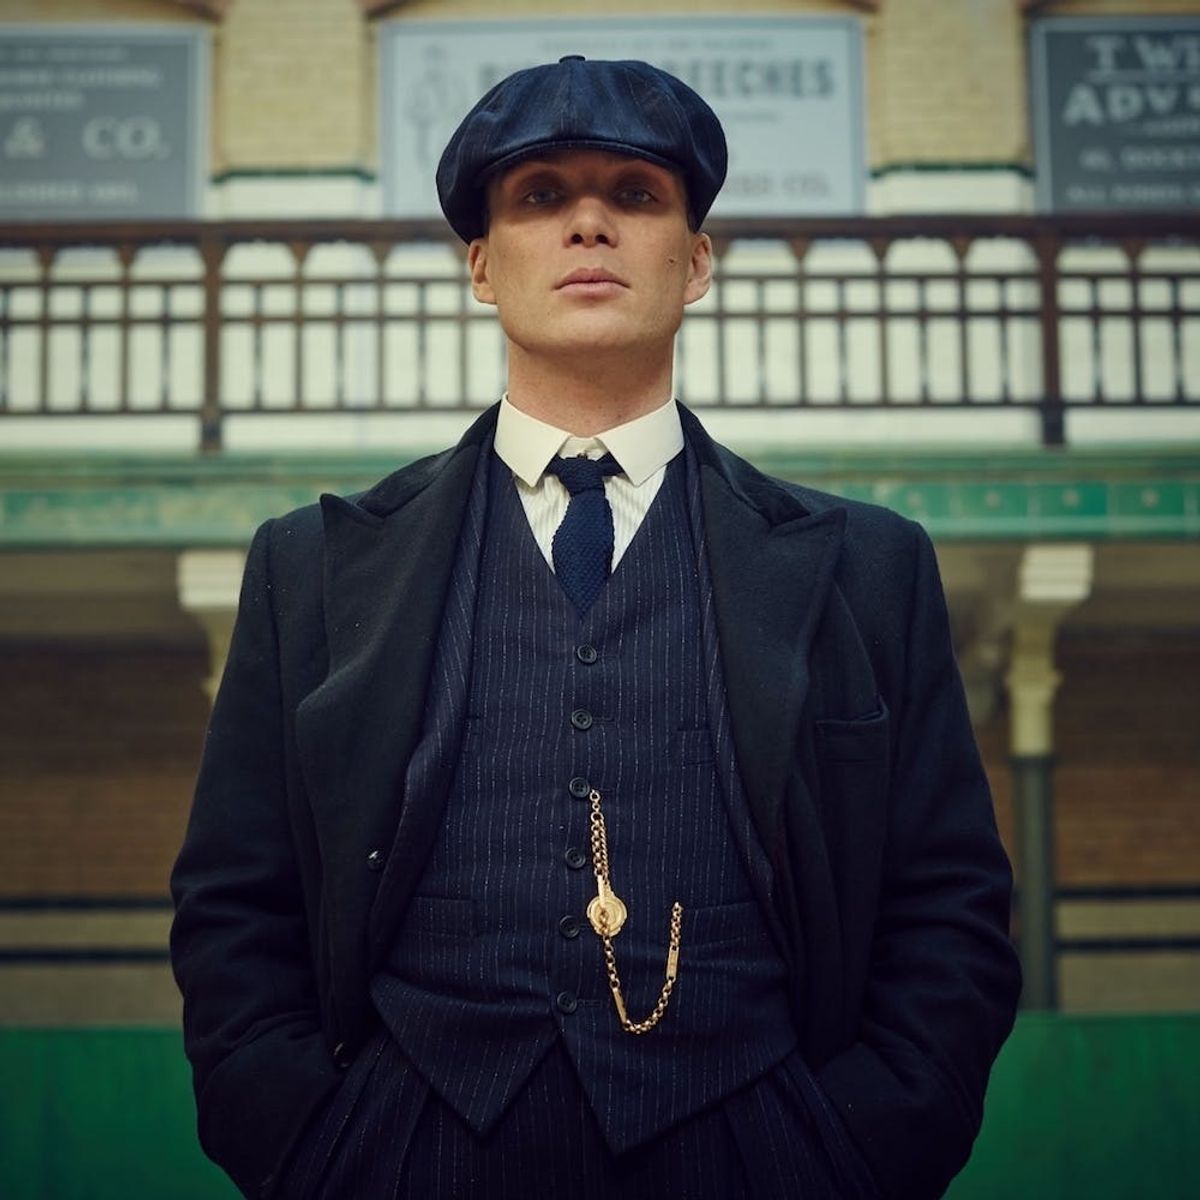 4 Shows Like Peaky Blinders to Cure Your Post-Binge Blues